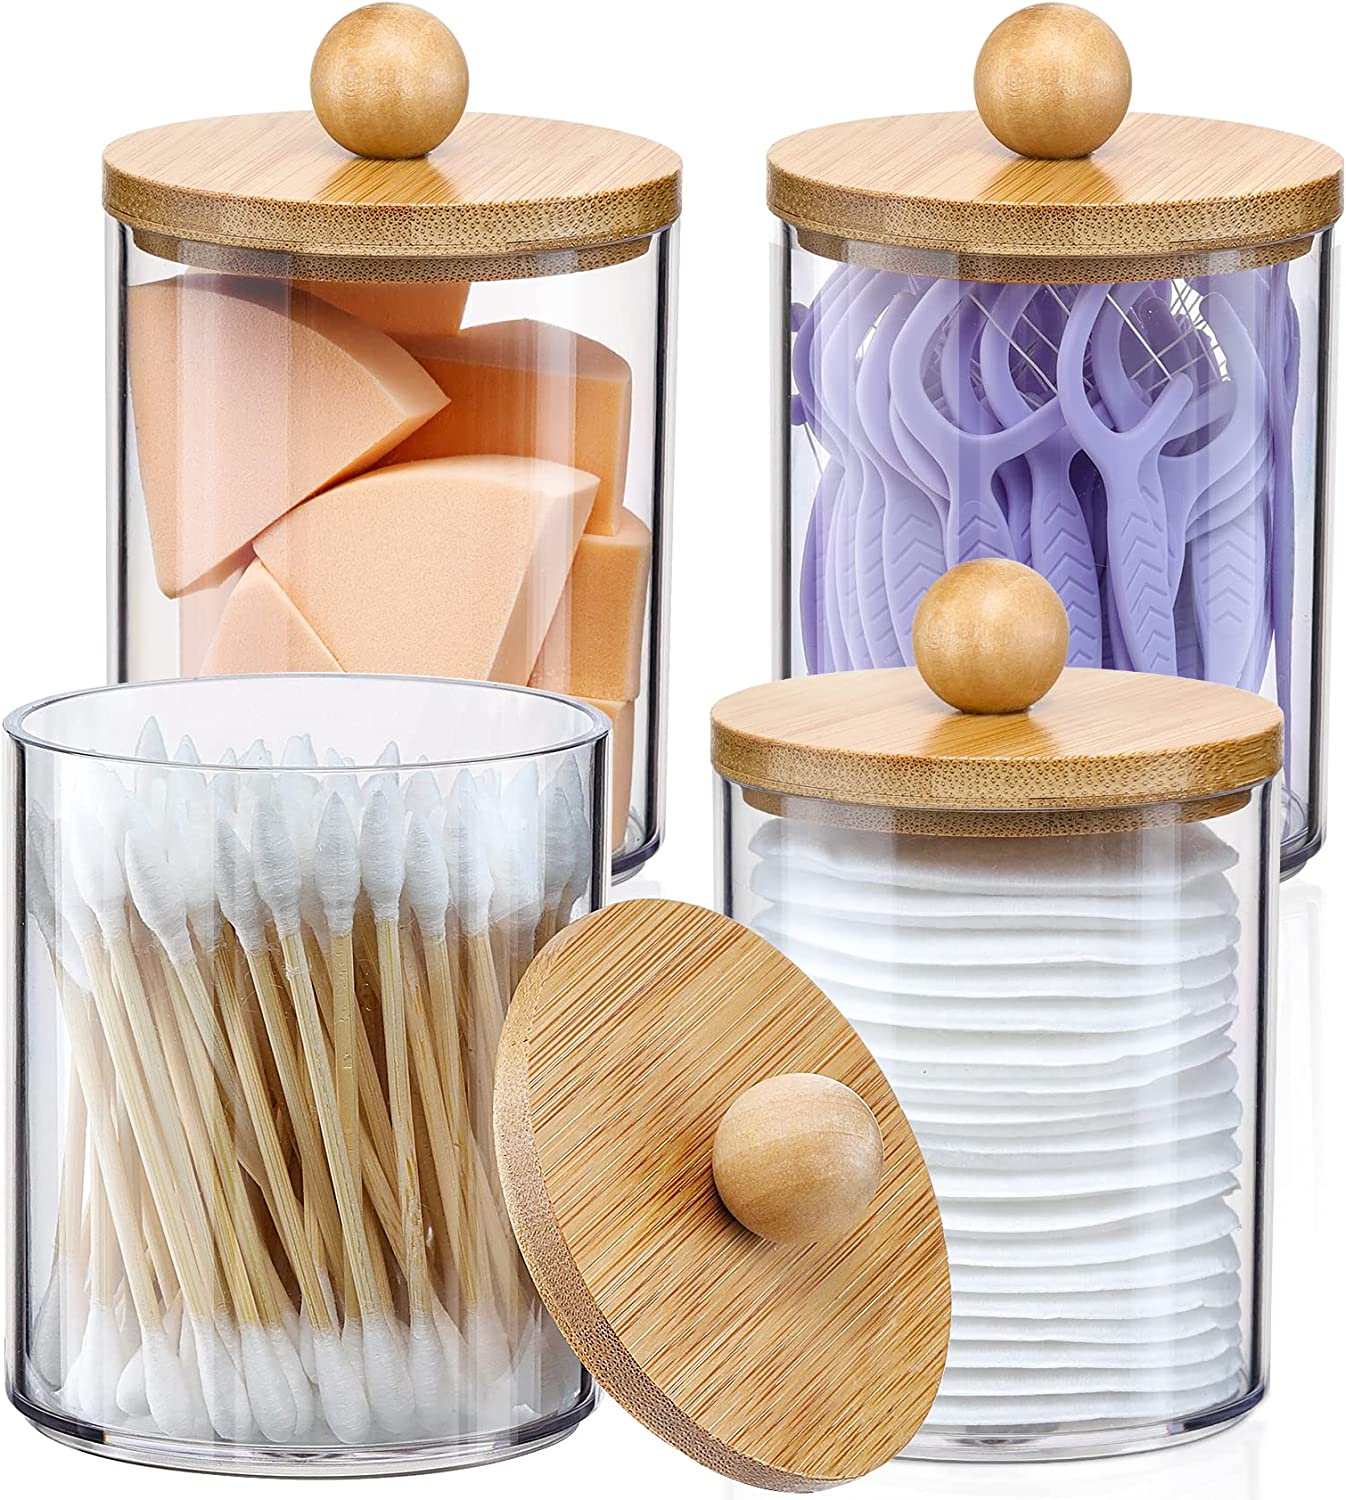 4 Pack Qtip Holder Dispenser with Bamboo Lids - 10 oz Clear Plastic Apothecary Jar Containers for Vanity Makeup Organizer Storage - Bathroom Accessories Set for Cotton Swab, Ball, Pads, Floss